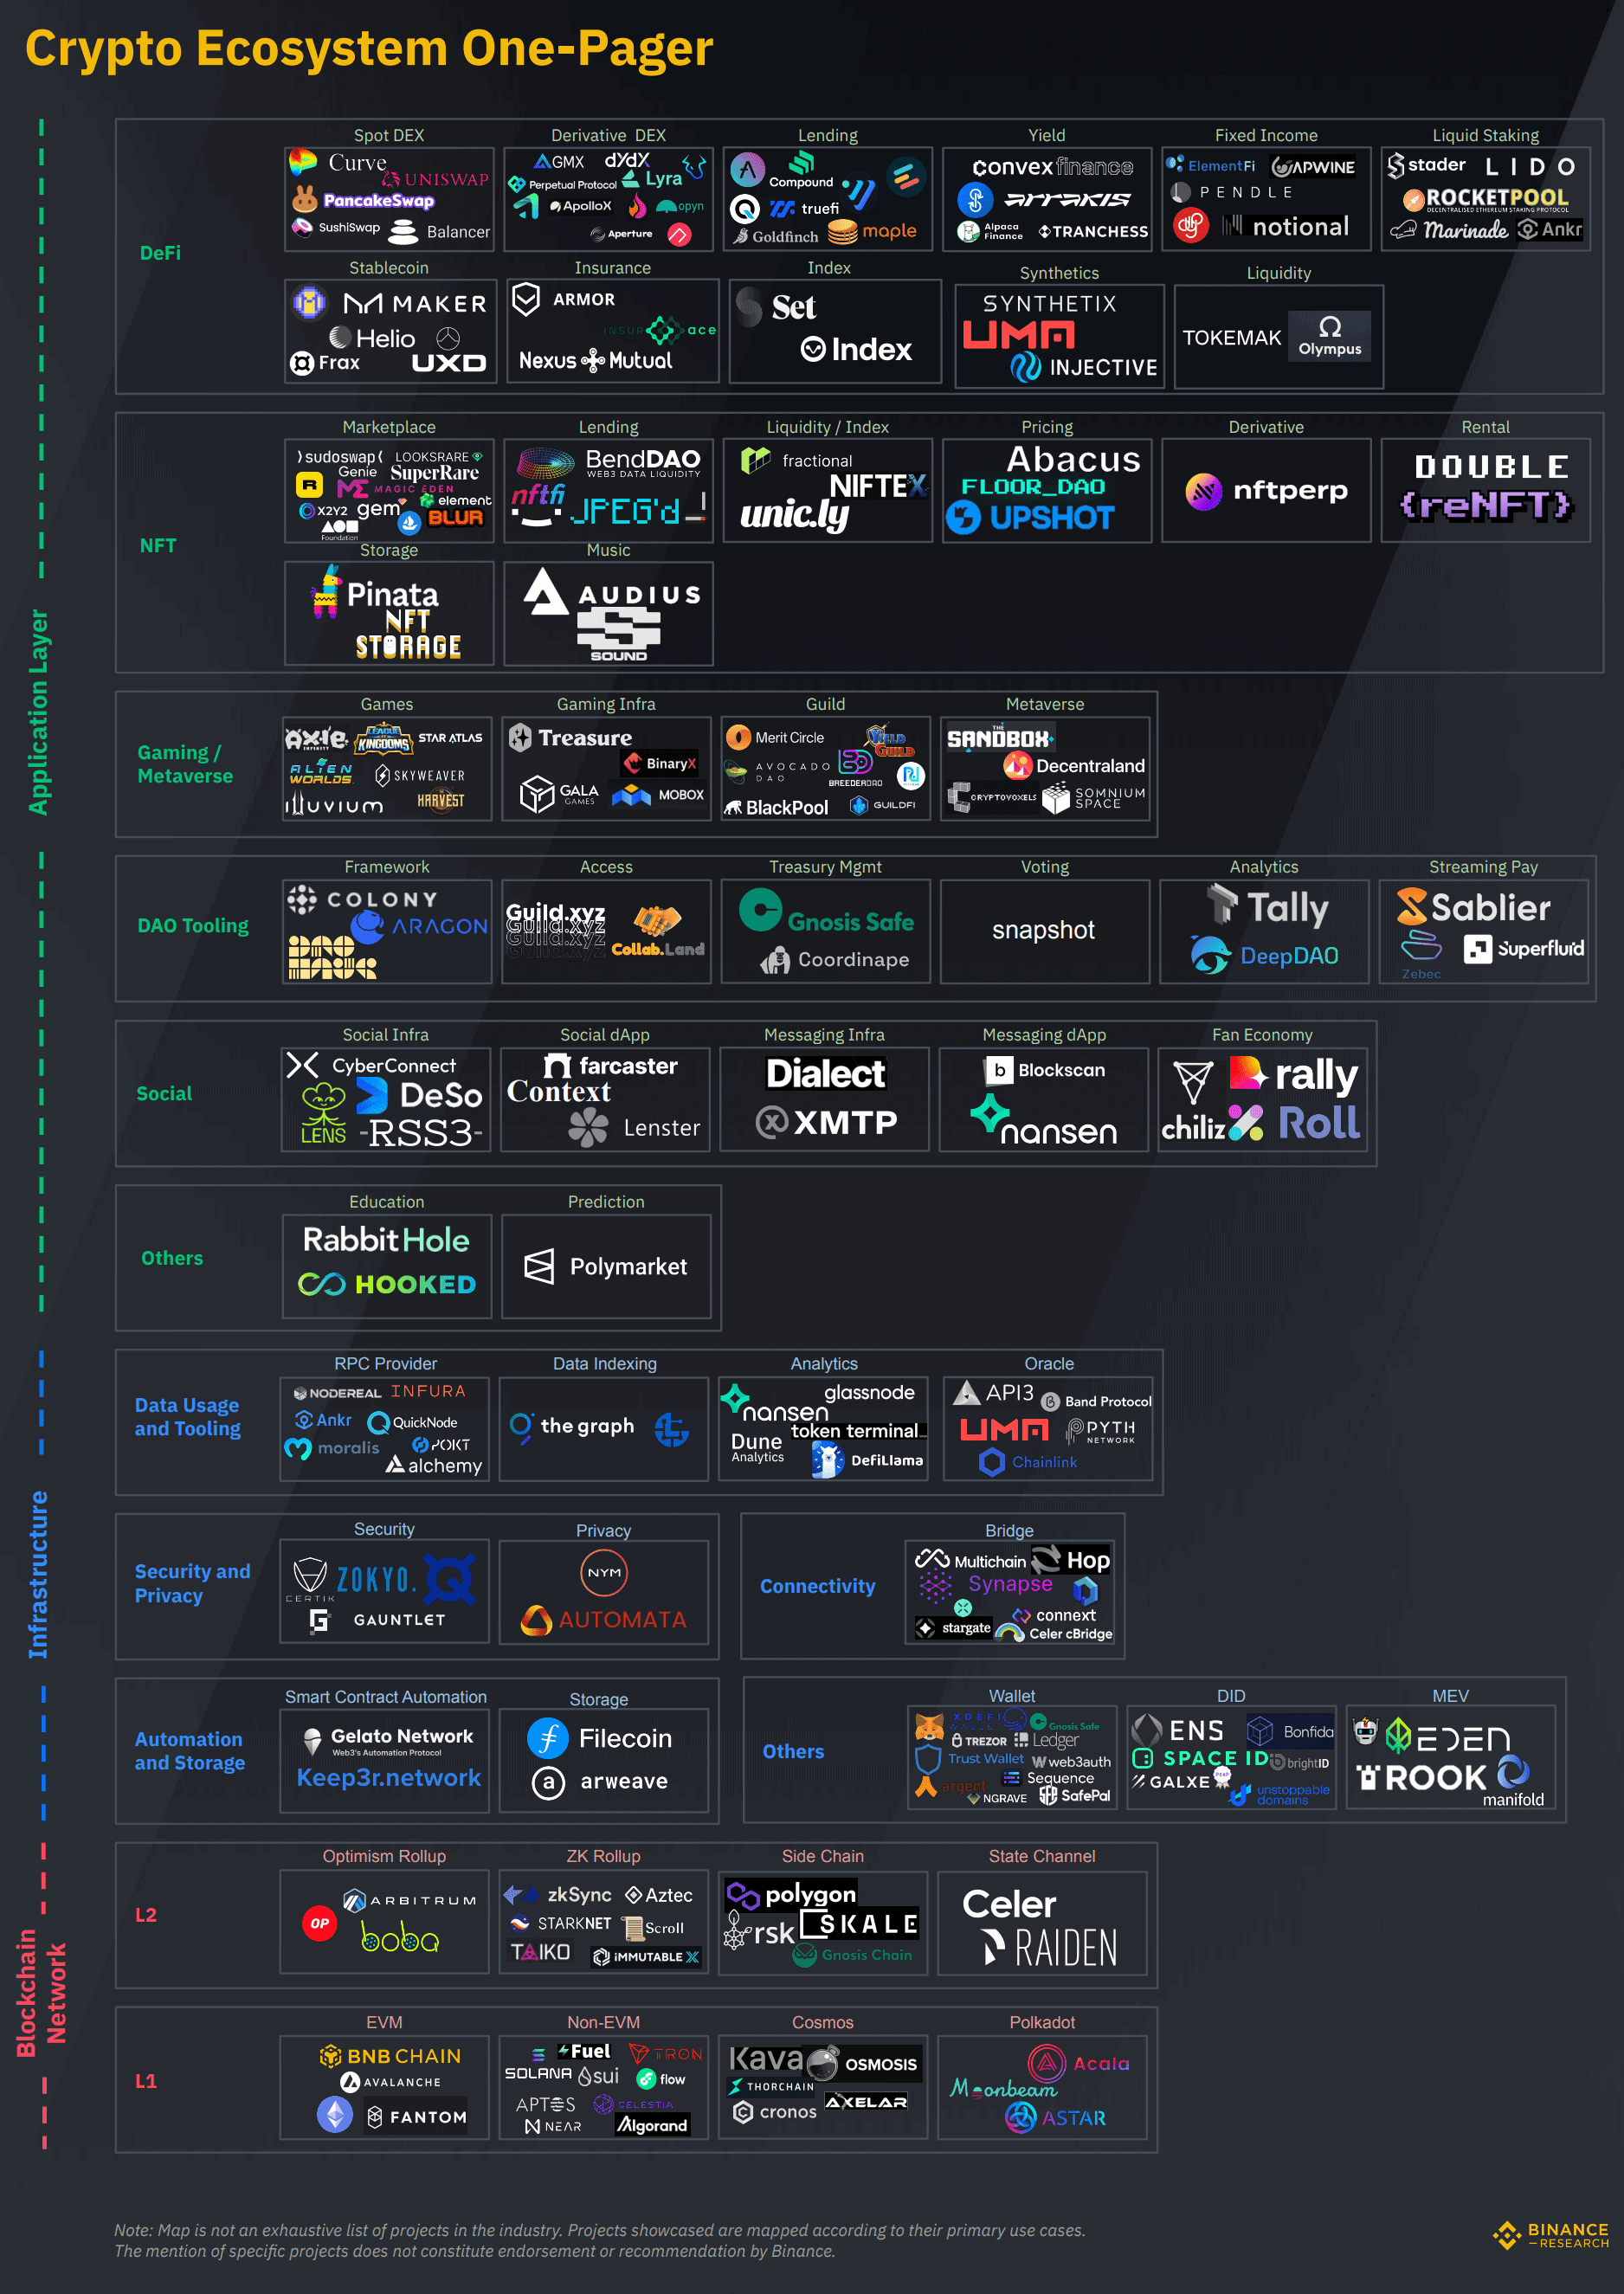 The crypto ecosystem binance research